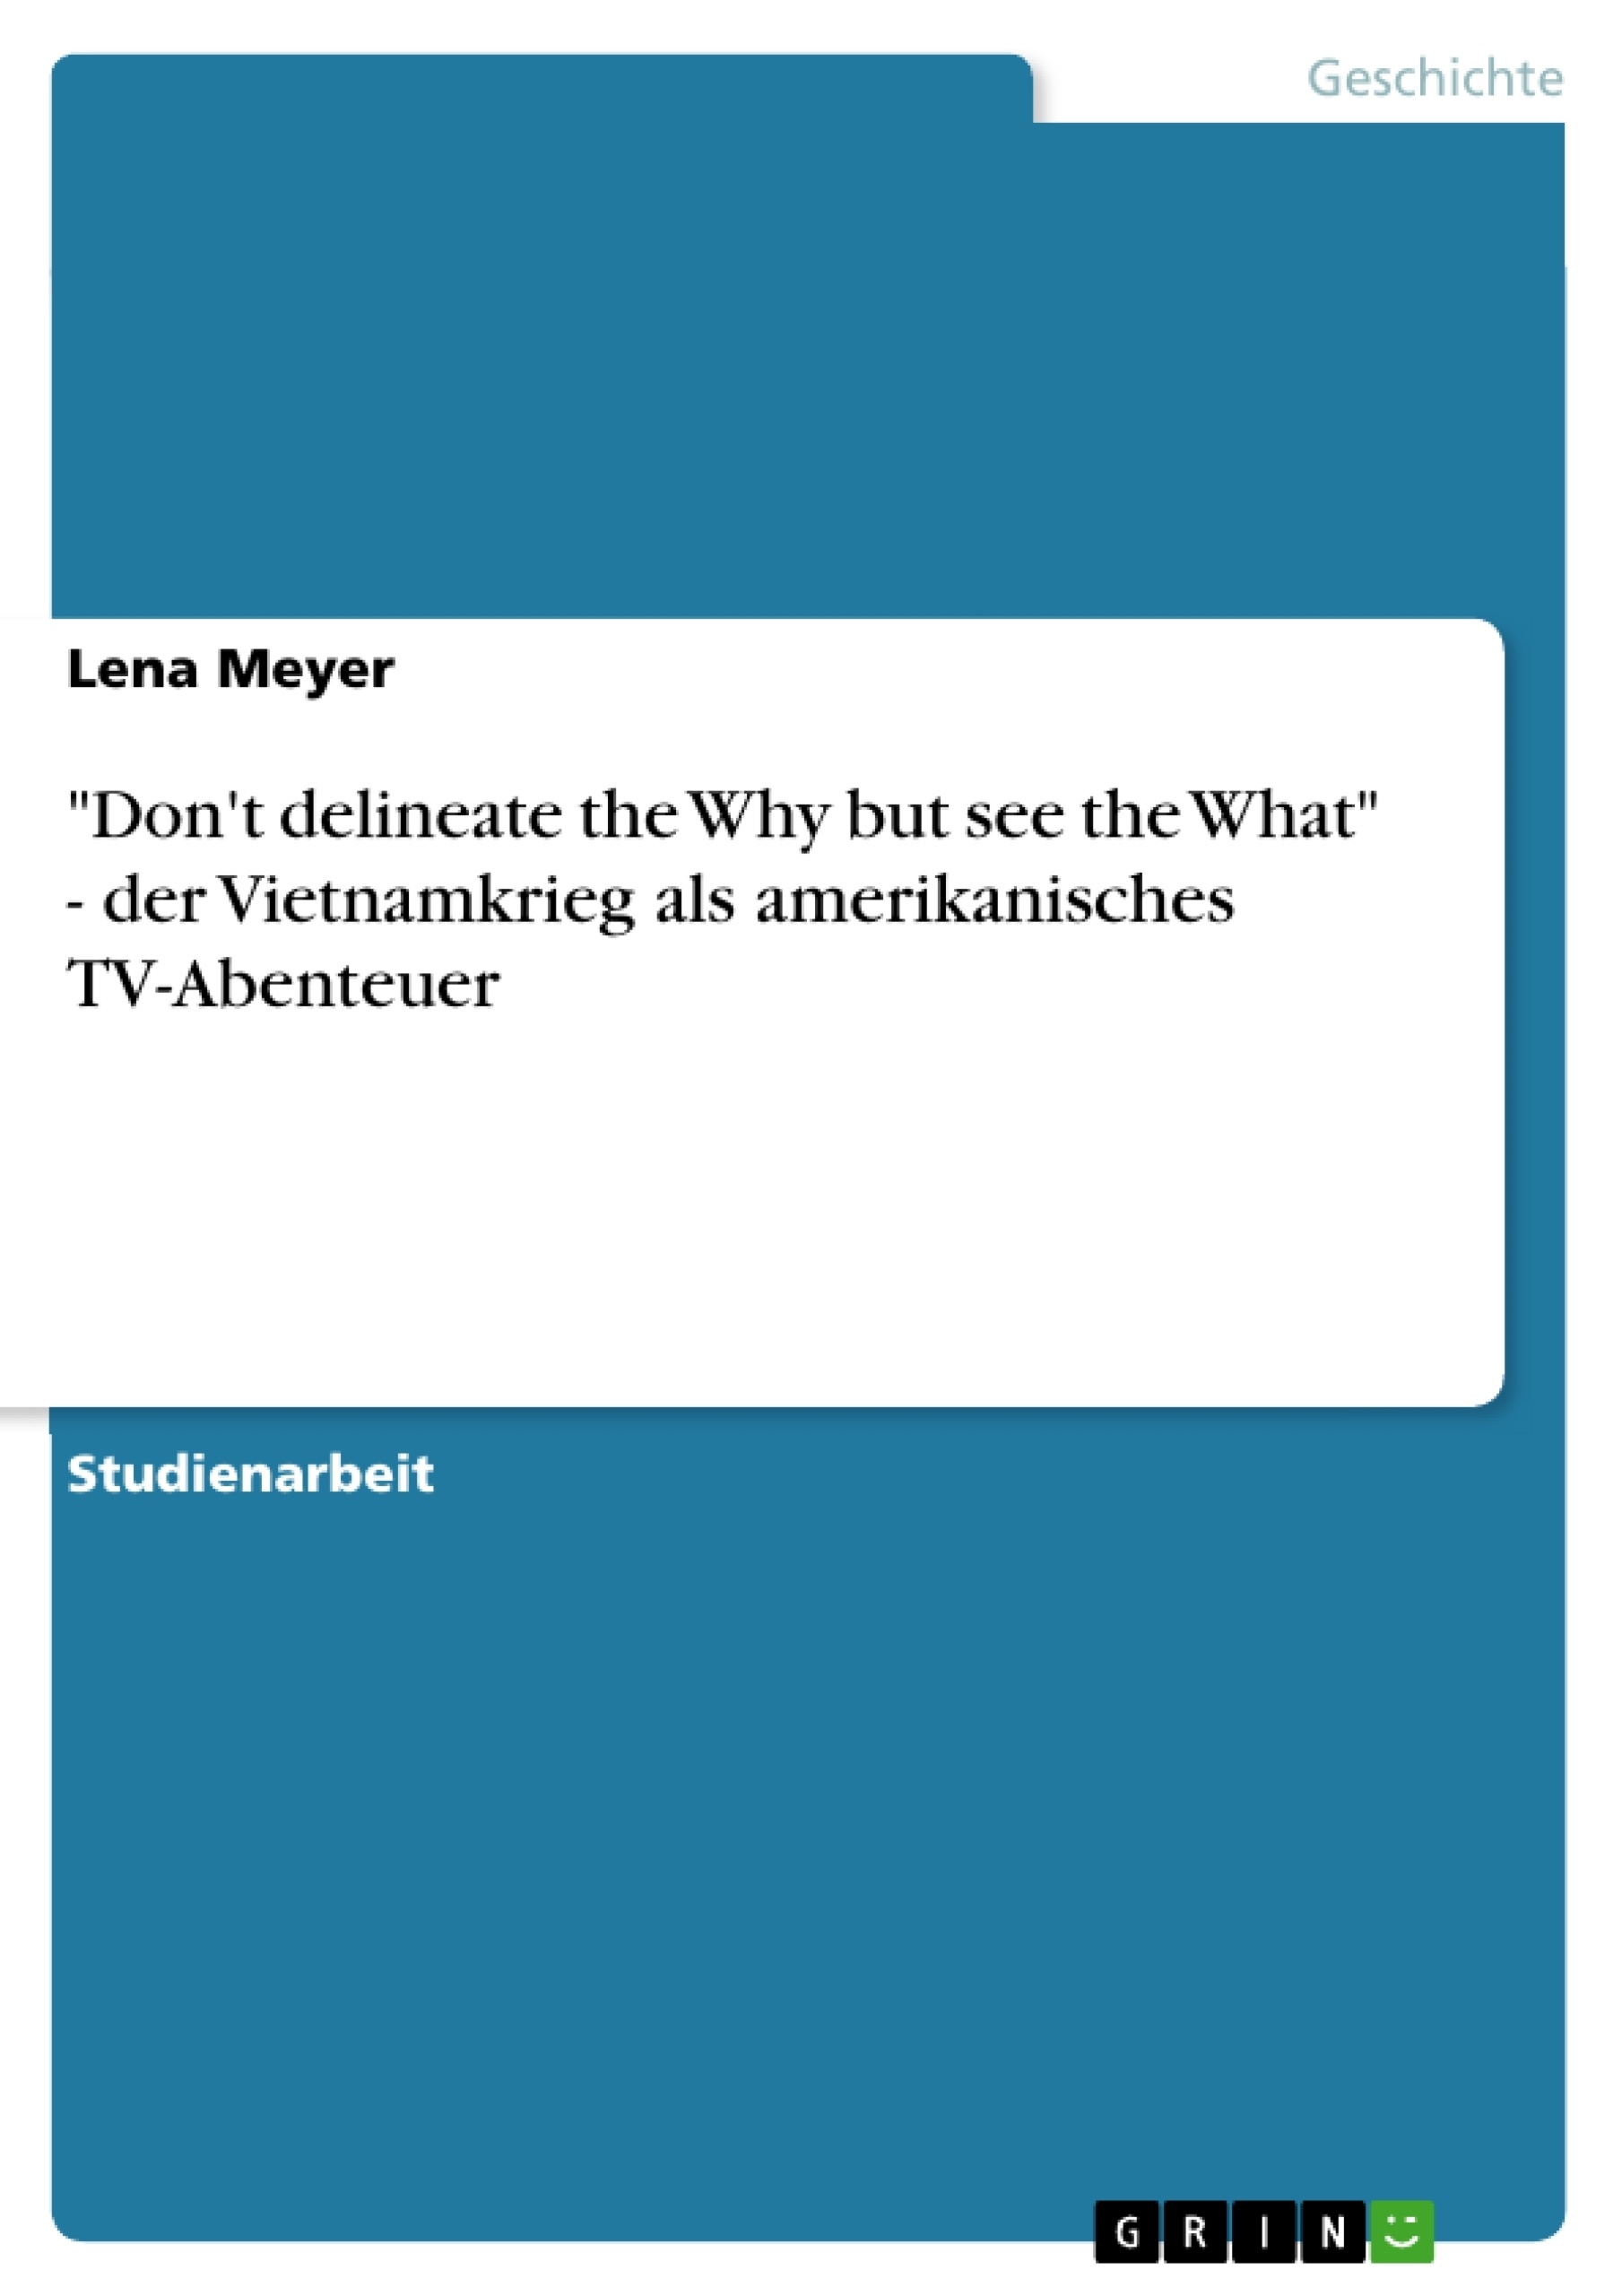 Title: "Don't delineate the Why but see the What" - der Vietnamkrieg als amerikanisches TV-Abenteuer